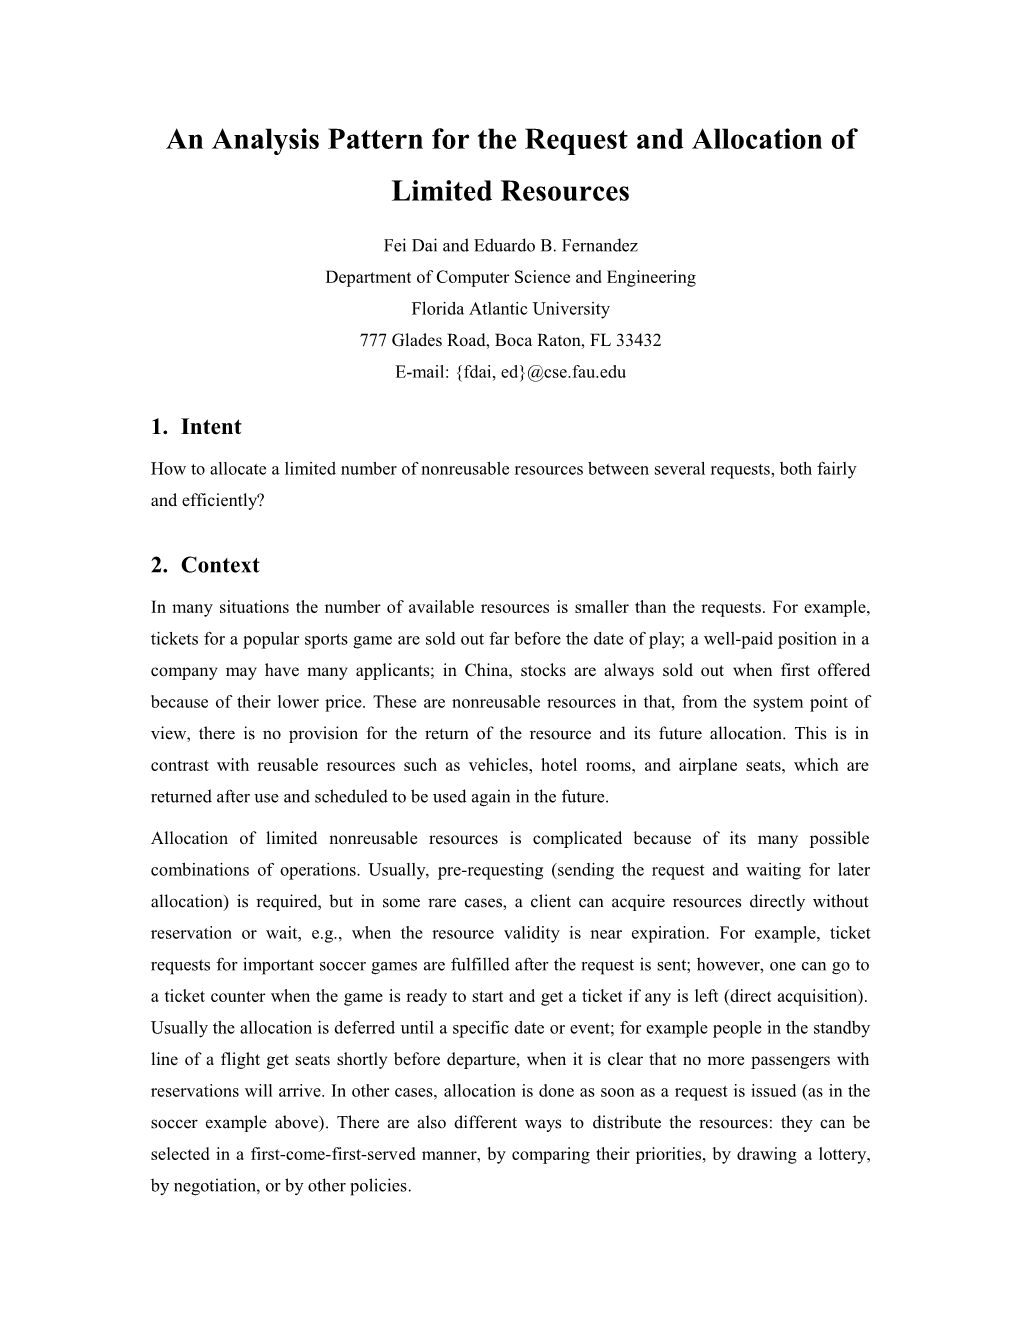 An Analysis Pattern for the Request and Allocation of Limited Resources